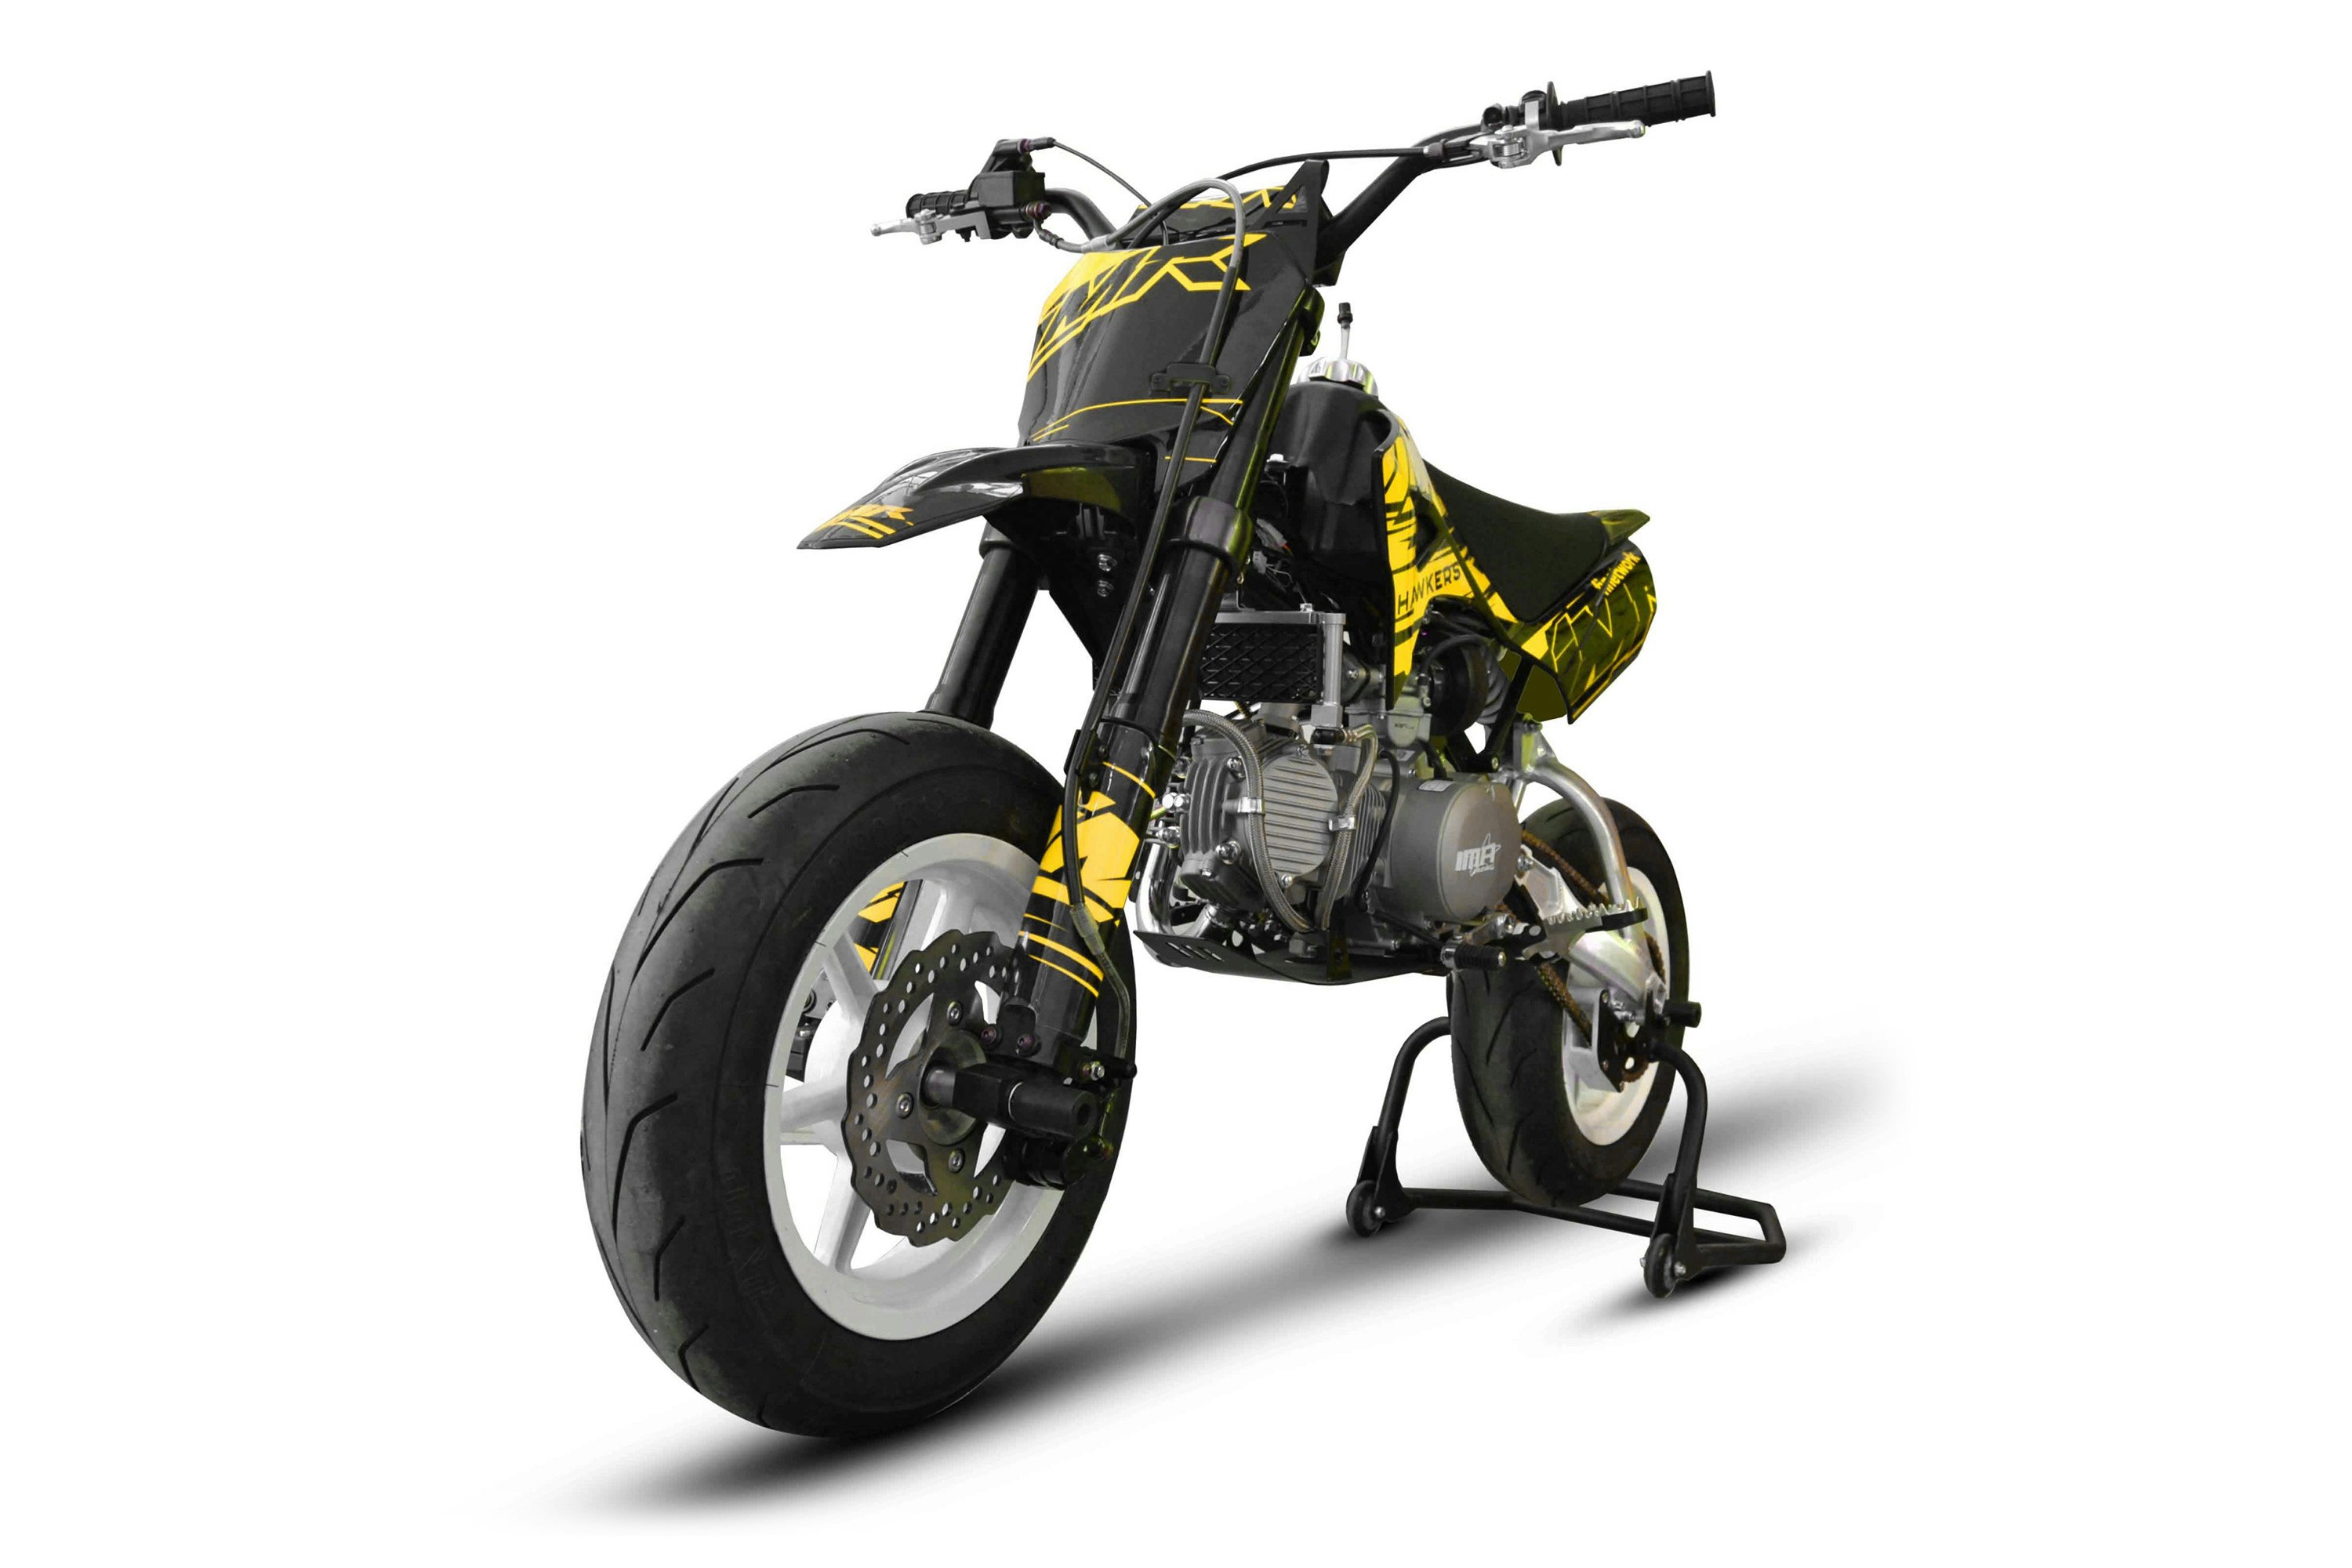 Pitbike IMR Corse 190 RR - 19 PS